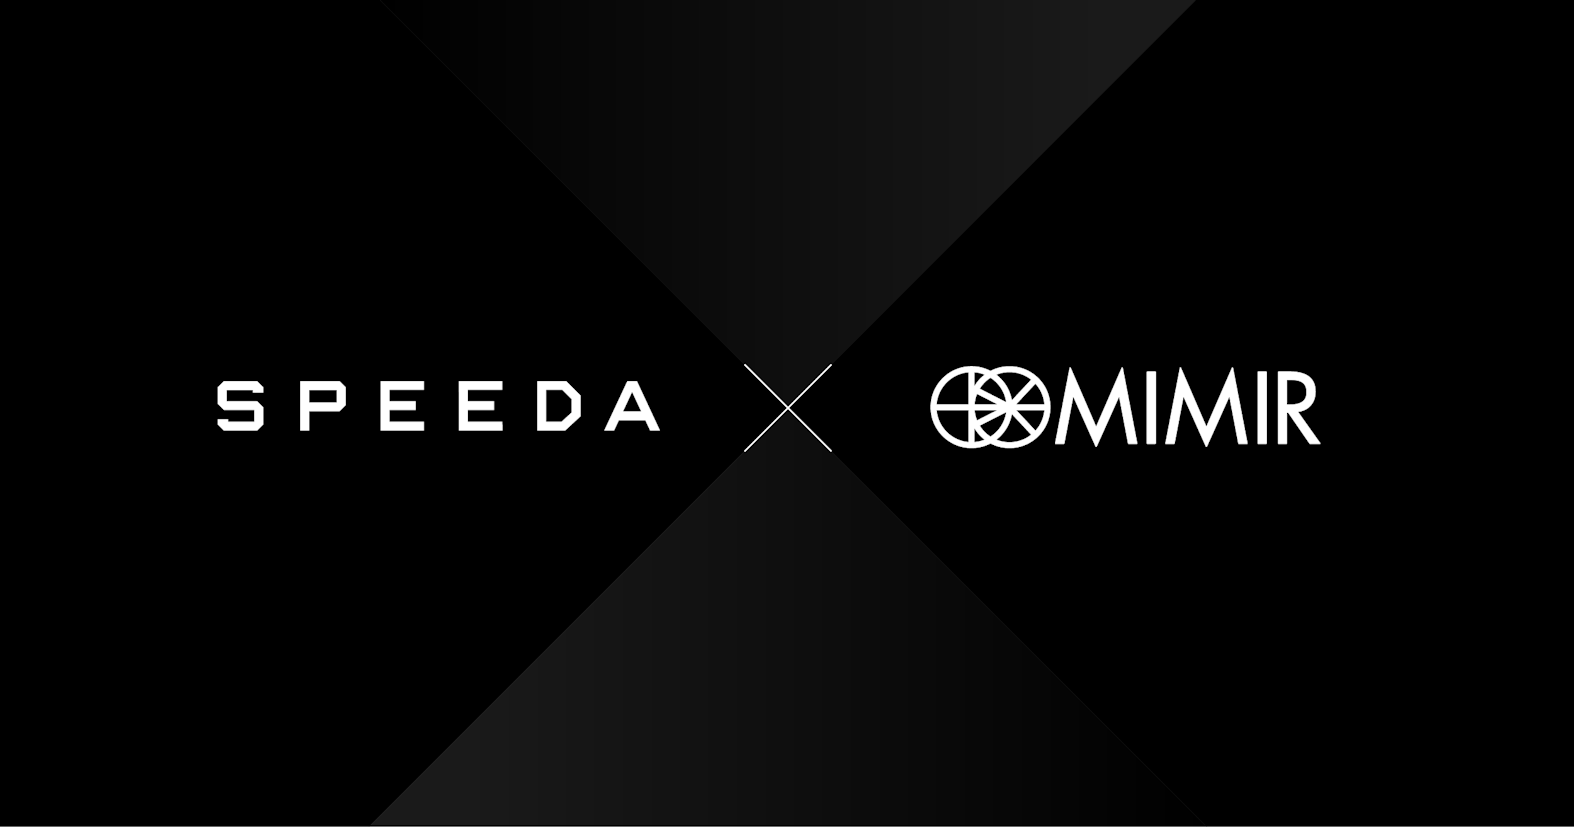 Expert Network “Mimir” Becomes Wholly Owned Subsidiary of Uzabase, Boosting Value Provided by SPEEDA